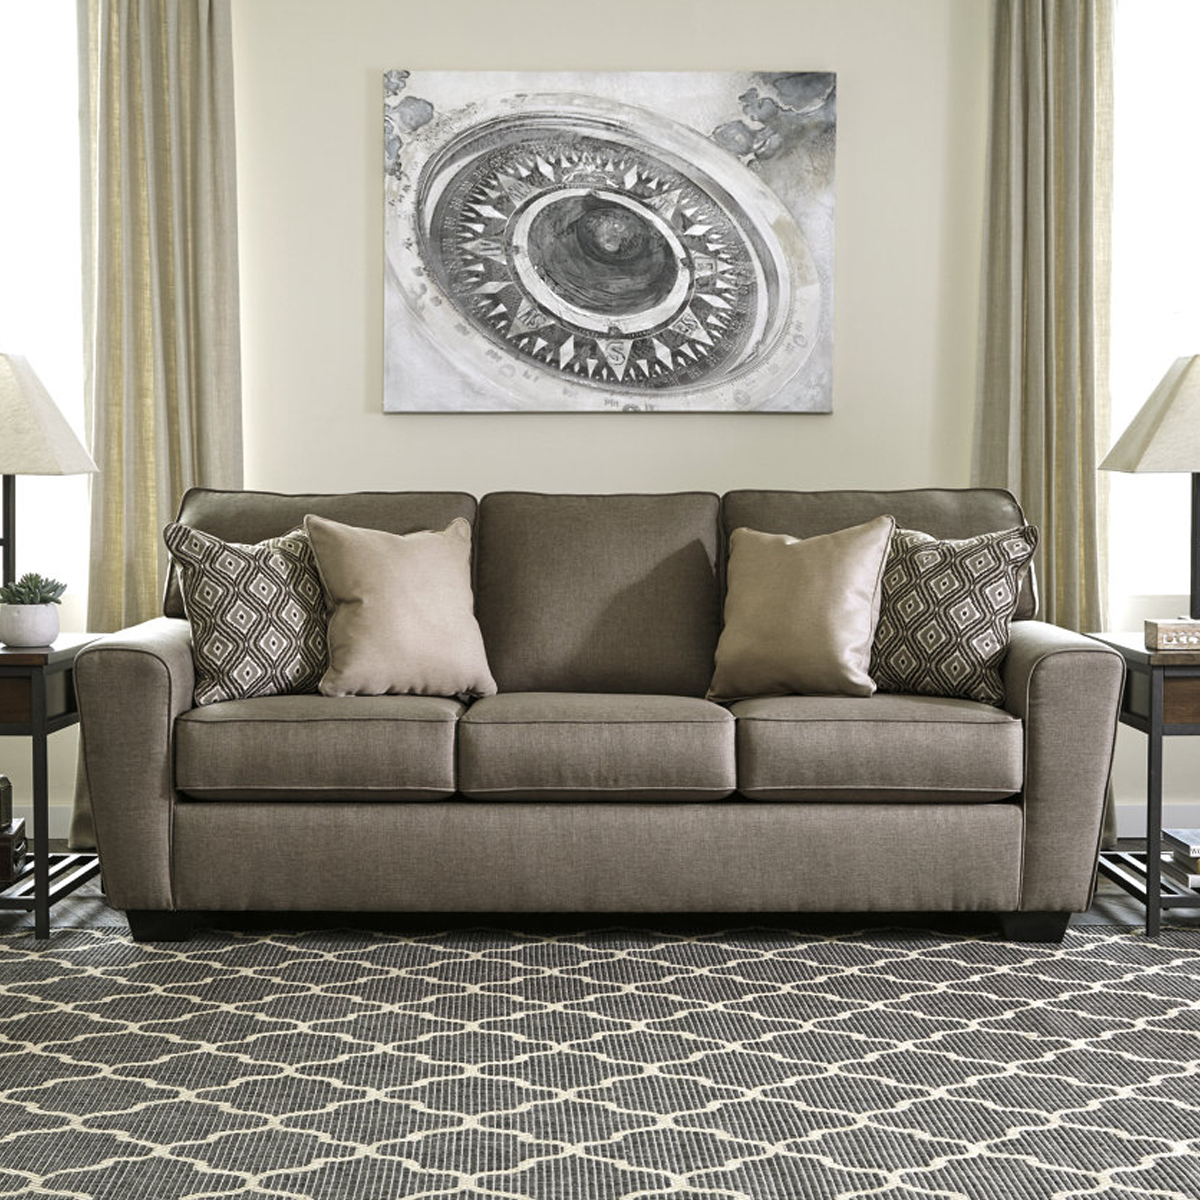 Picture of CLEO SOFA